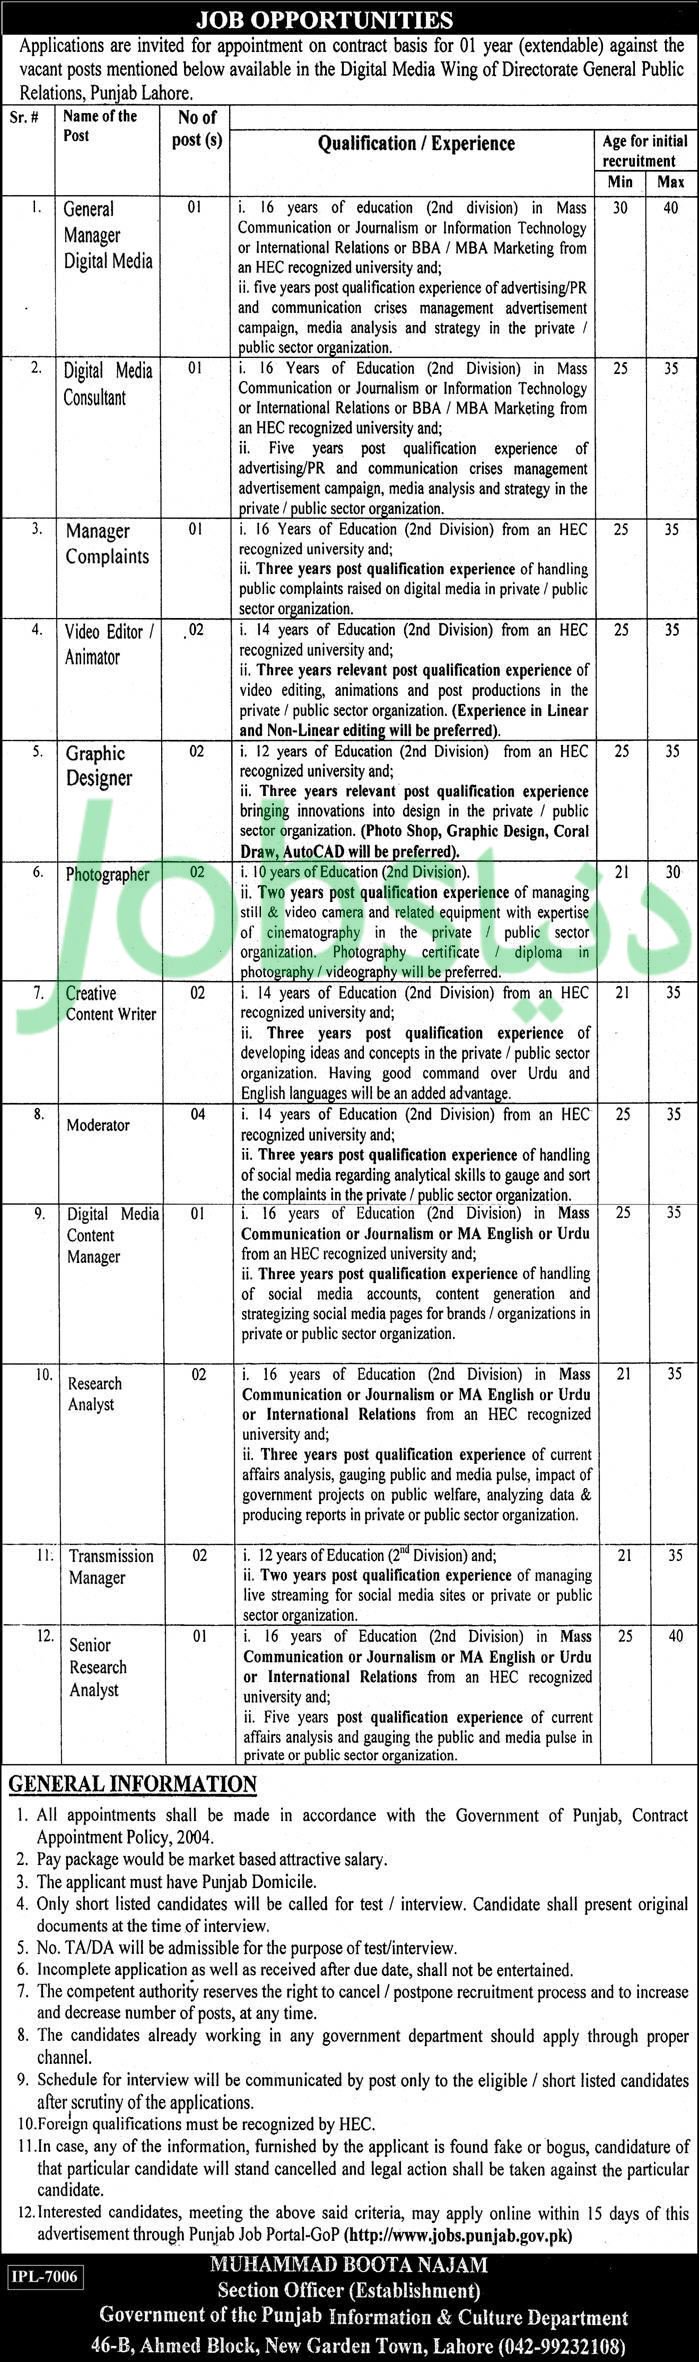 Directorate General Public Relations Punjab Jobs 2019 for Admin, Creative, Digital & Multimedia, Research & Other Staff